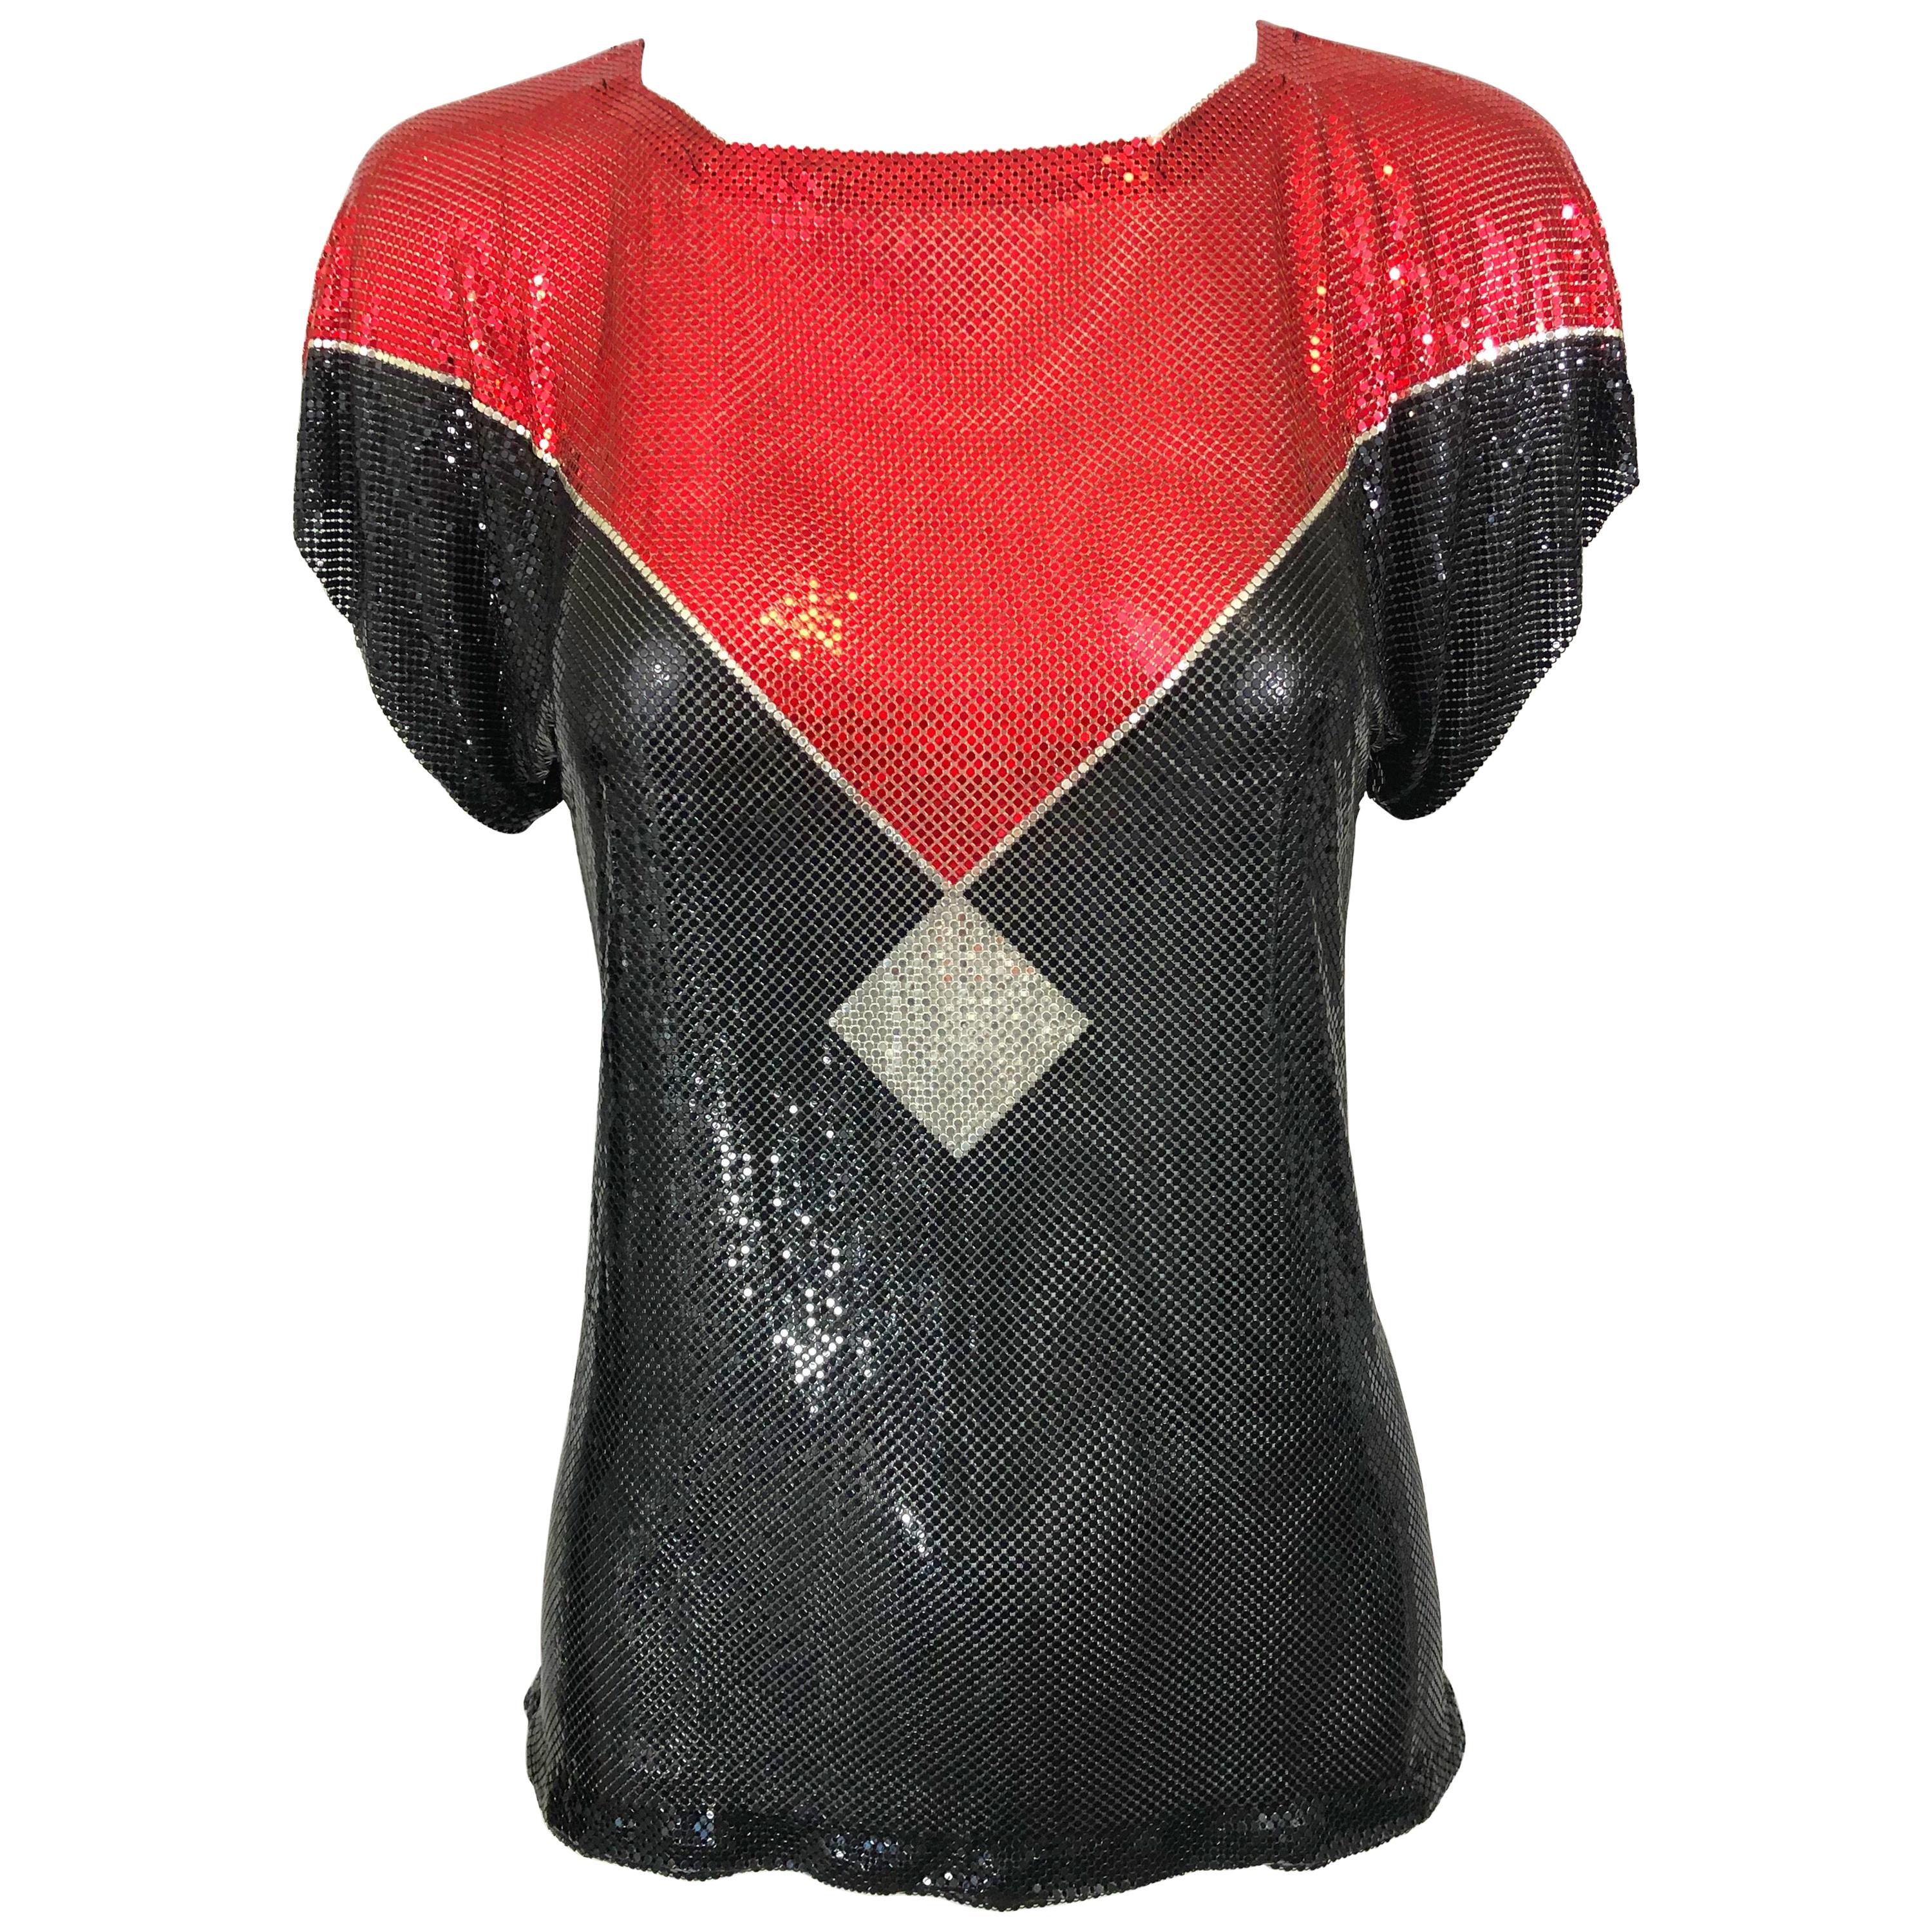 Avant Garde 1970s Whiting & Davis Red + Black + Silver Chainmail Metal Mesh Top For Sale